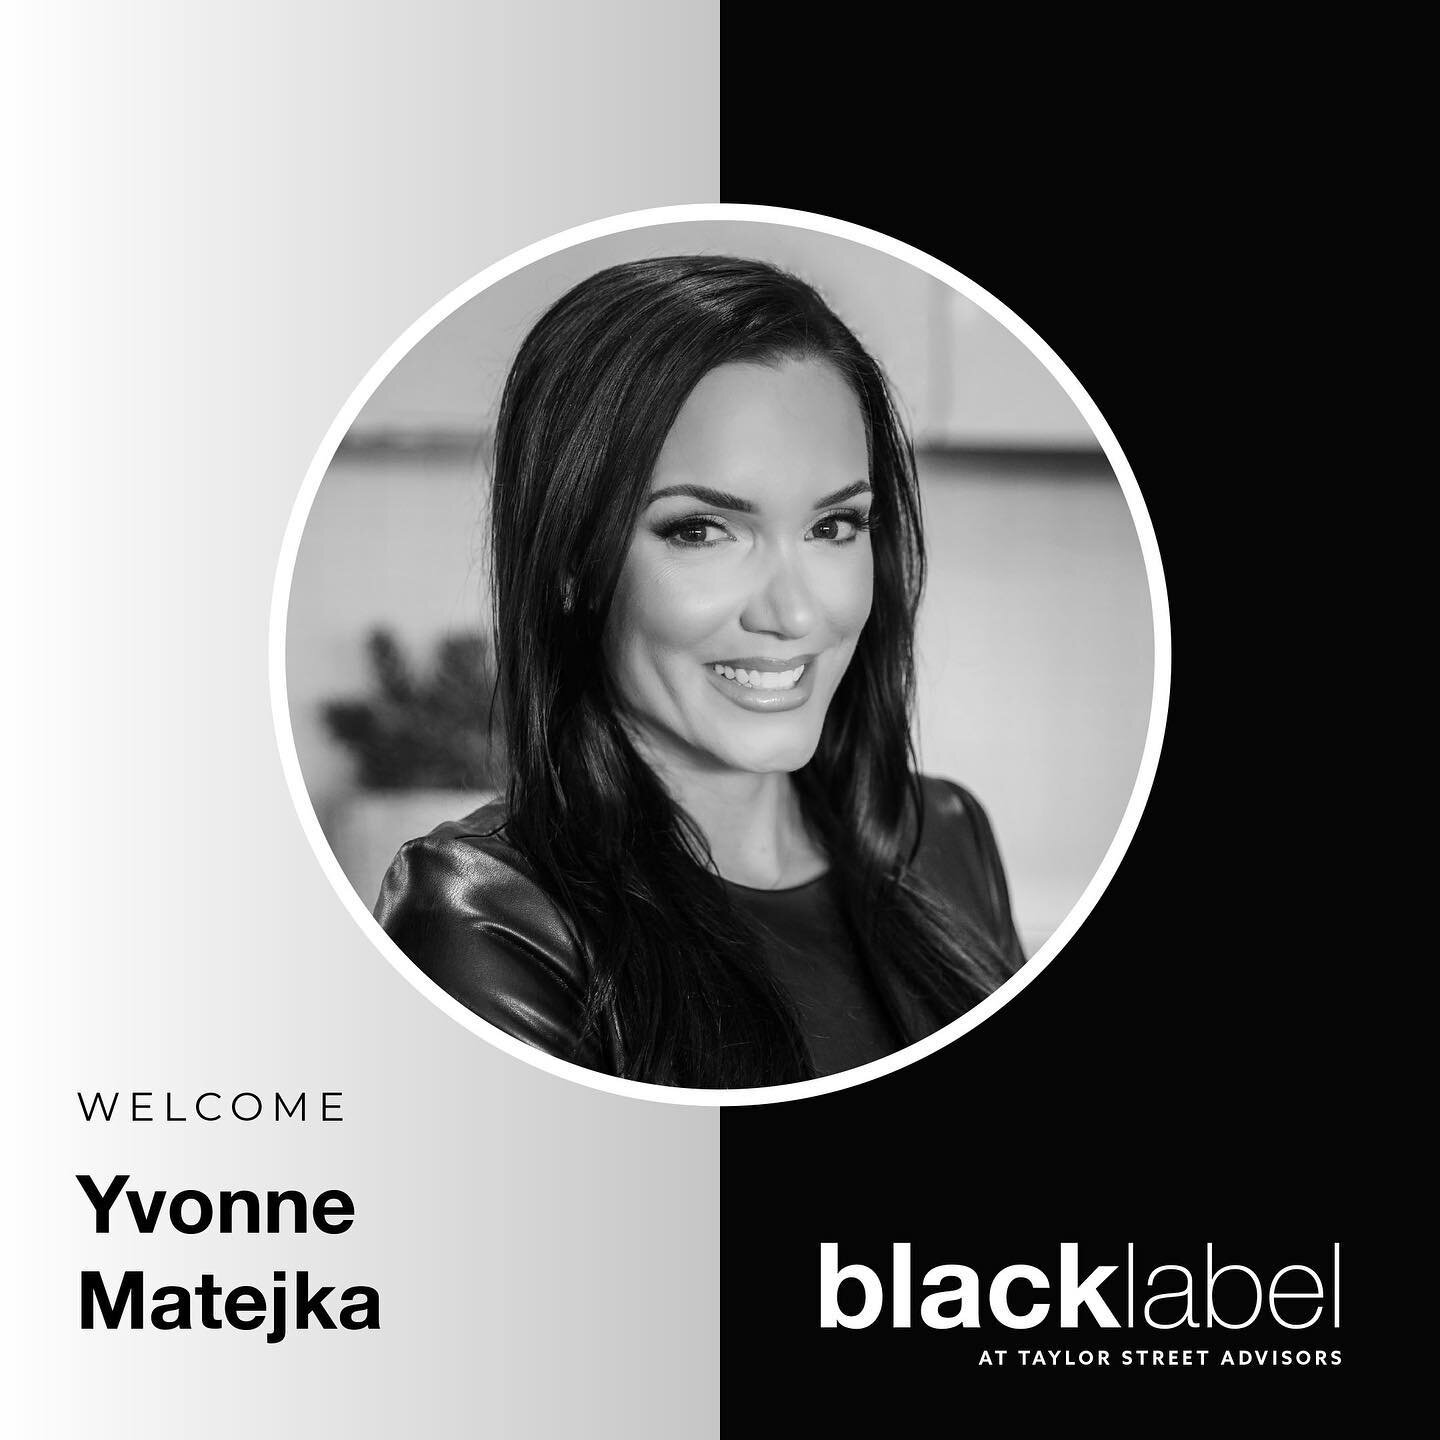 Black Label would like to welcome Yvonne Matejka to the team. We&rsquo;re glad to be in business with you! @theyvonnere  #scottsdale #paradisevalley #phoenix #arcadiaaz #biltmore